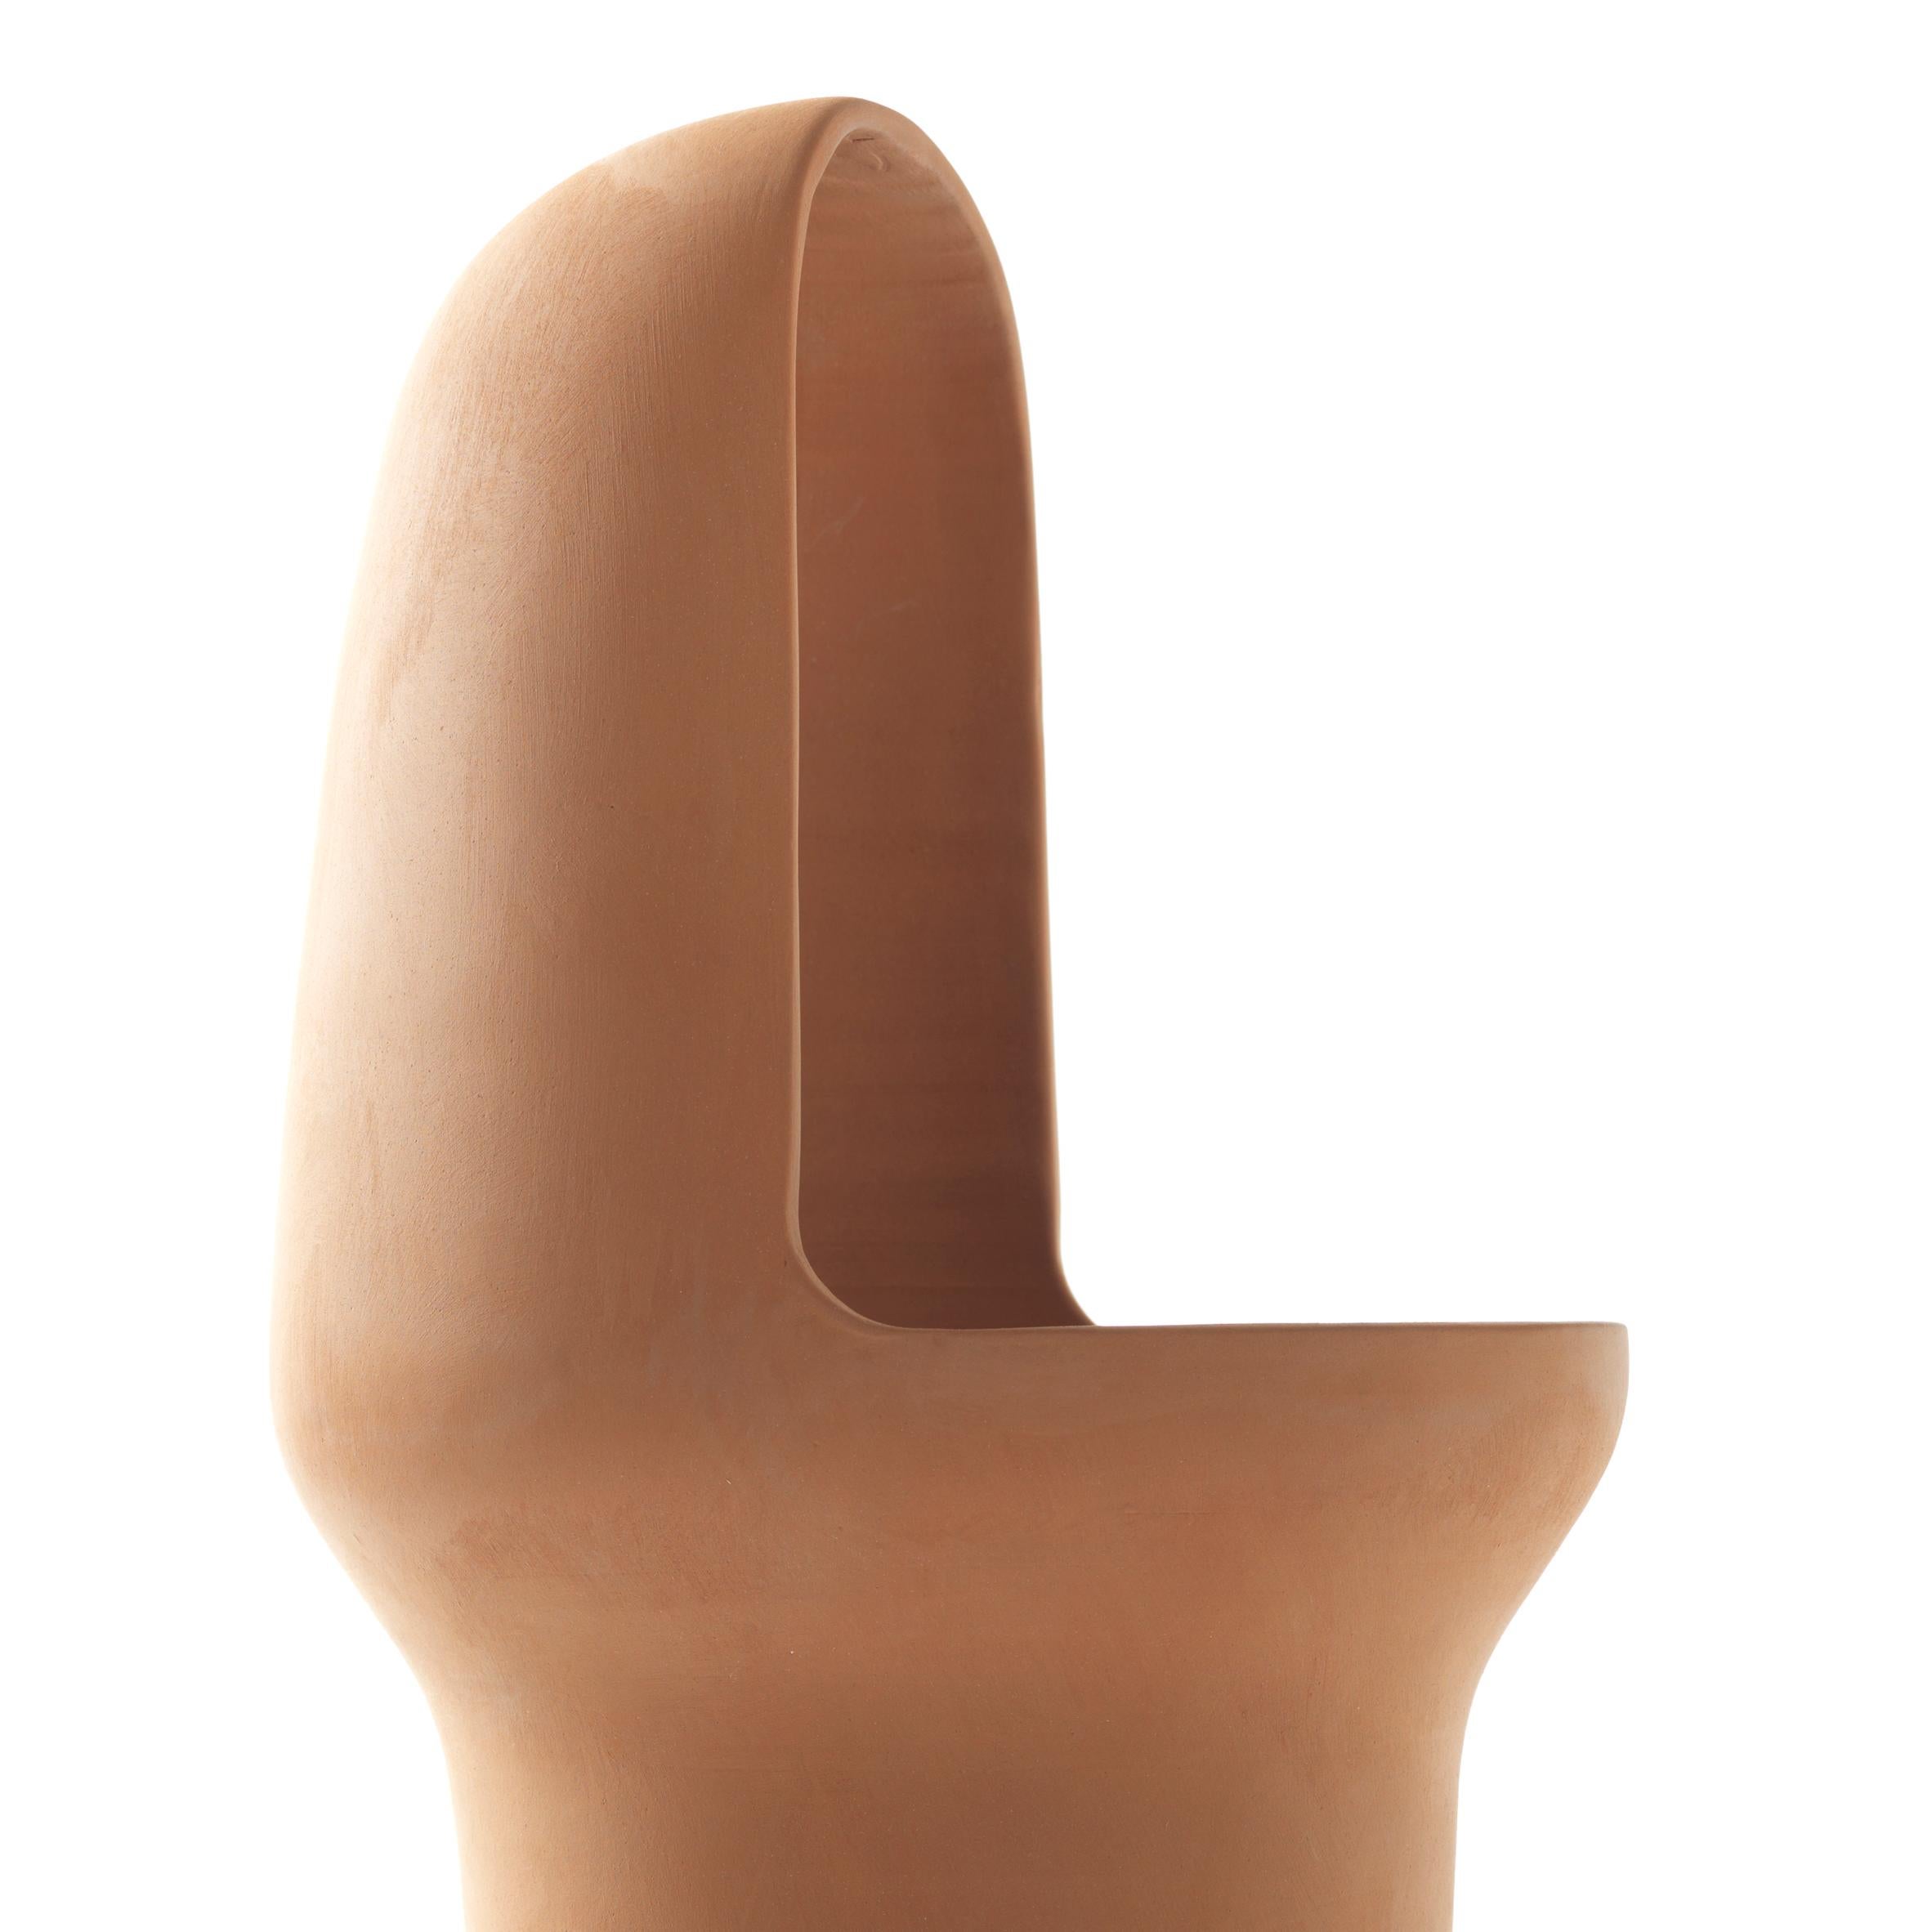 Gardenias vase nº 1 by Jaime Hayon

Hand-turned terracotta with an impermeable treatment.